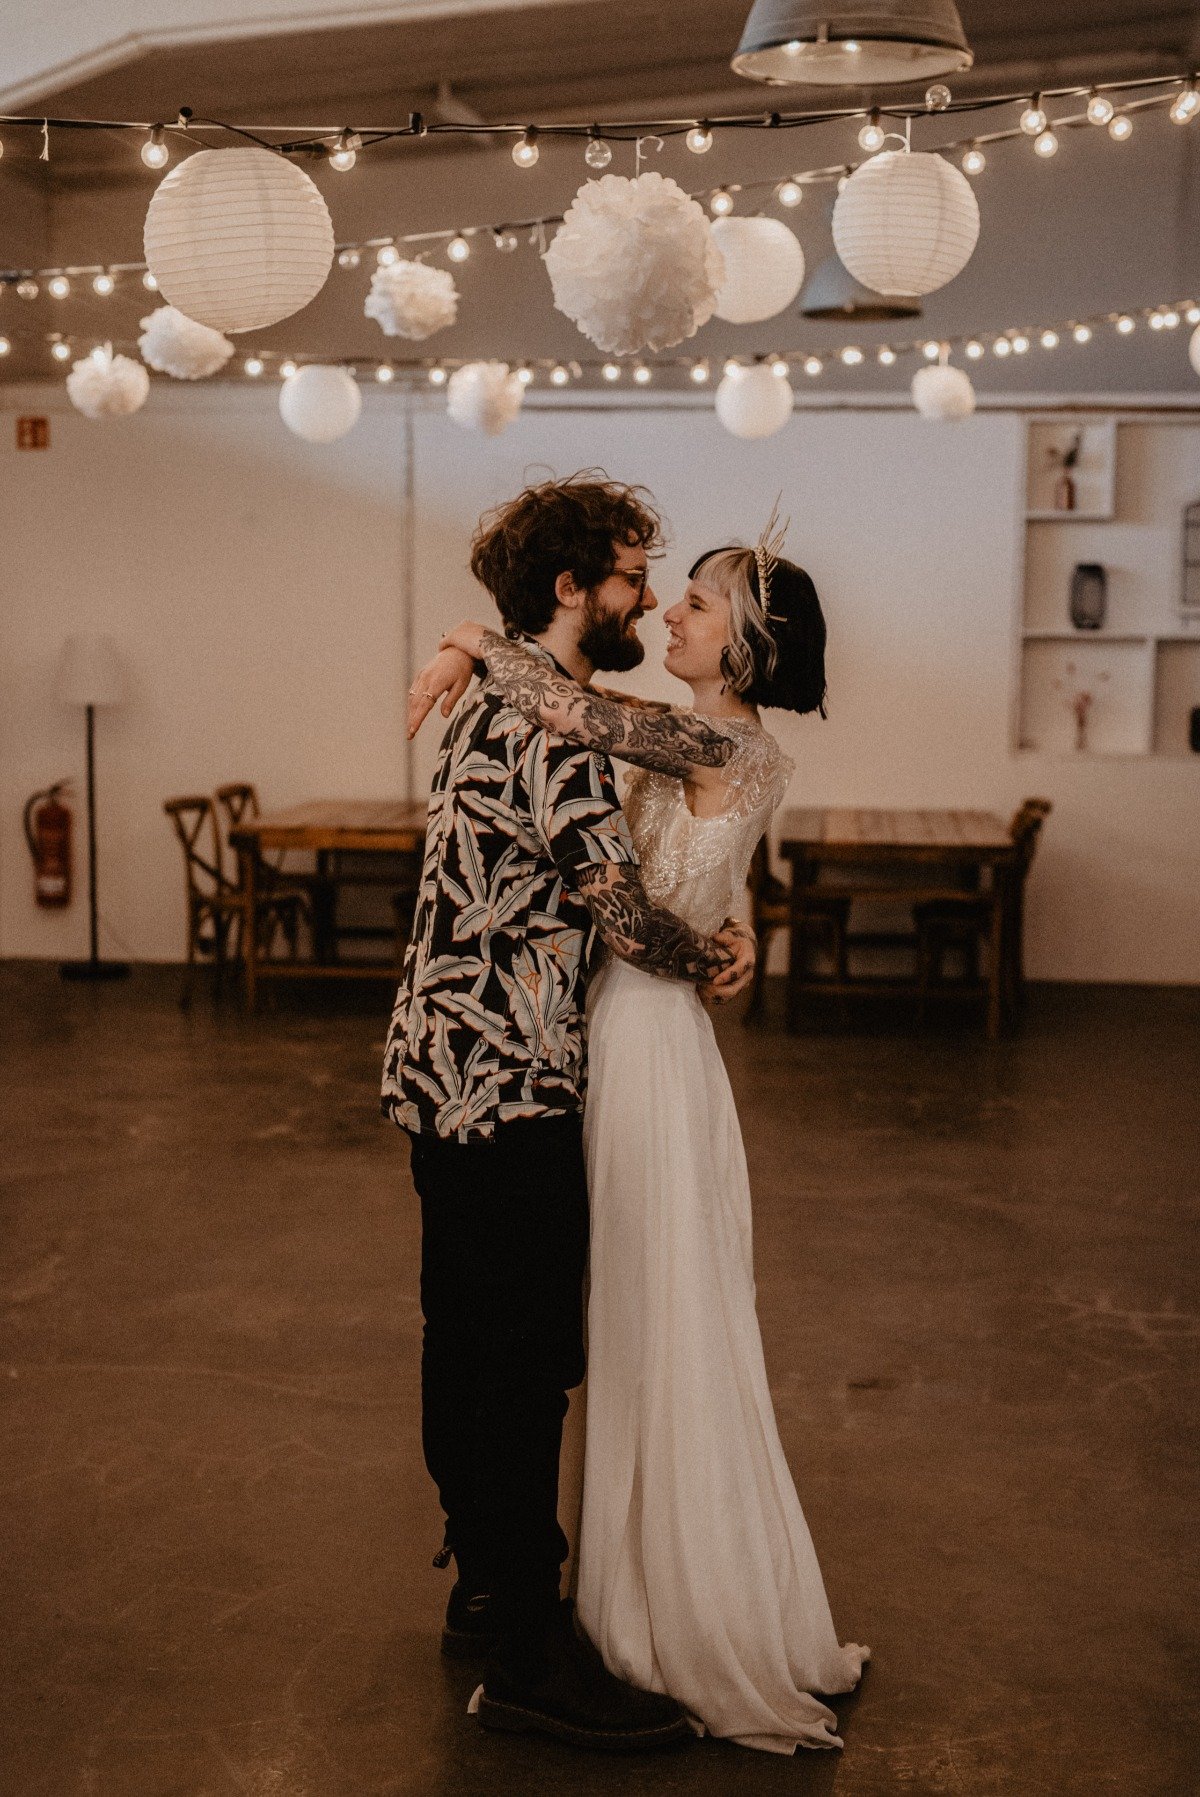 Bride and groom dancing under globe and string lights